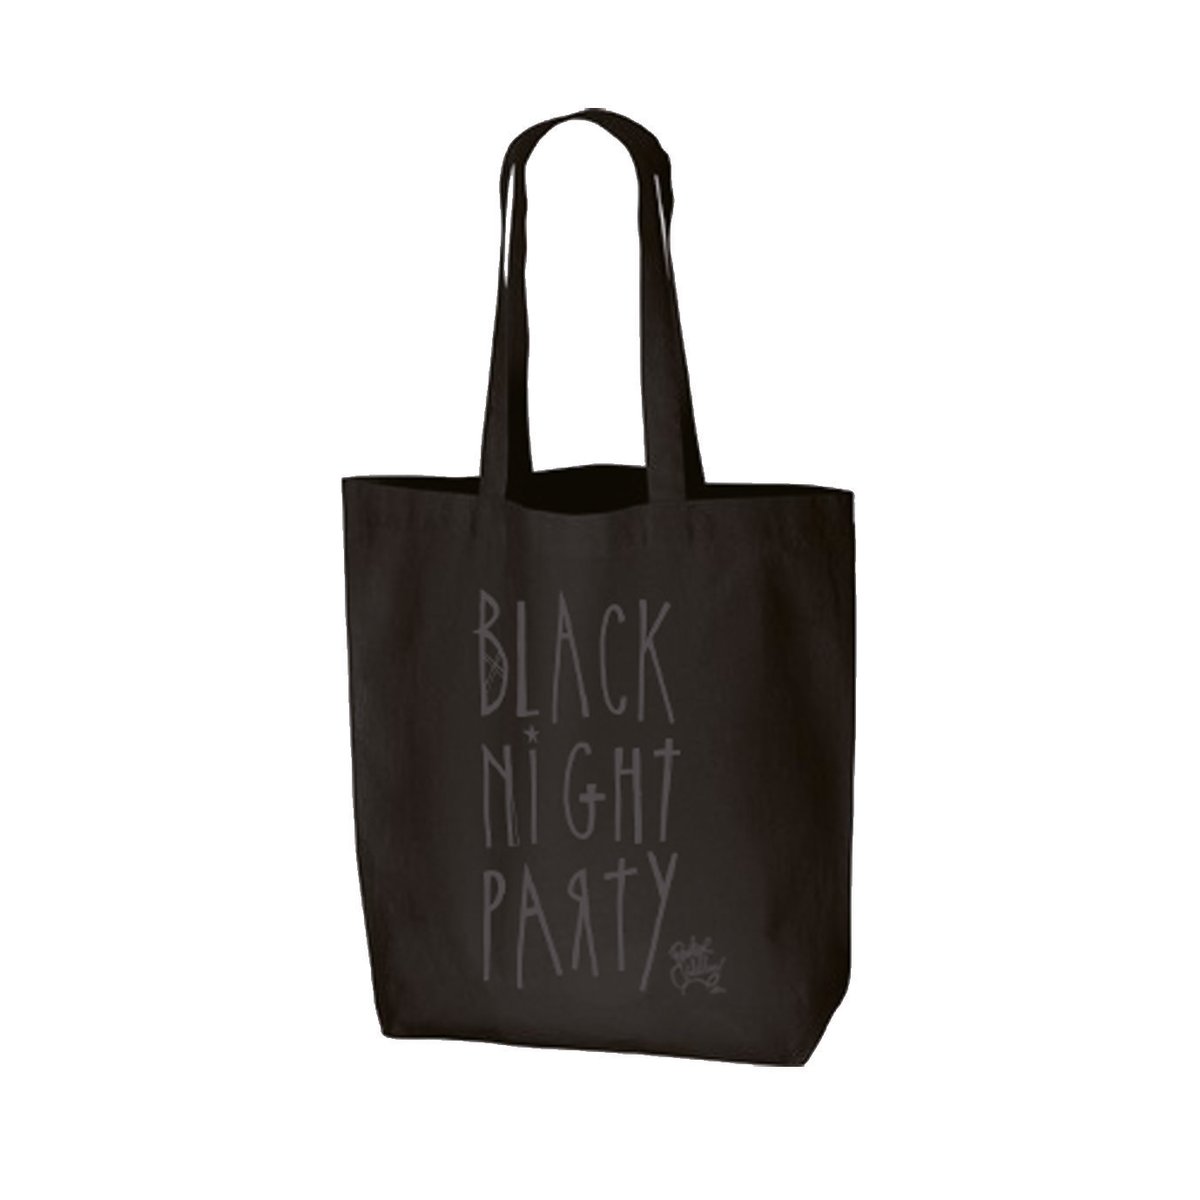 BLACK NIGHT PARTY Tote Bag | Fairly Close Up Of...